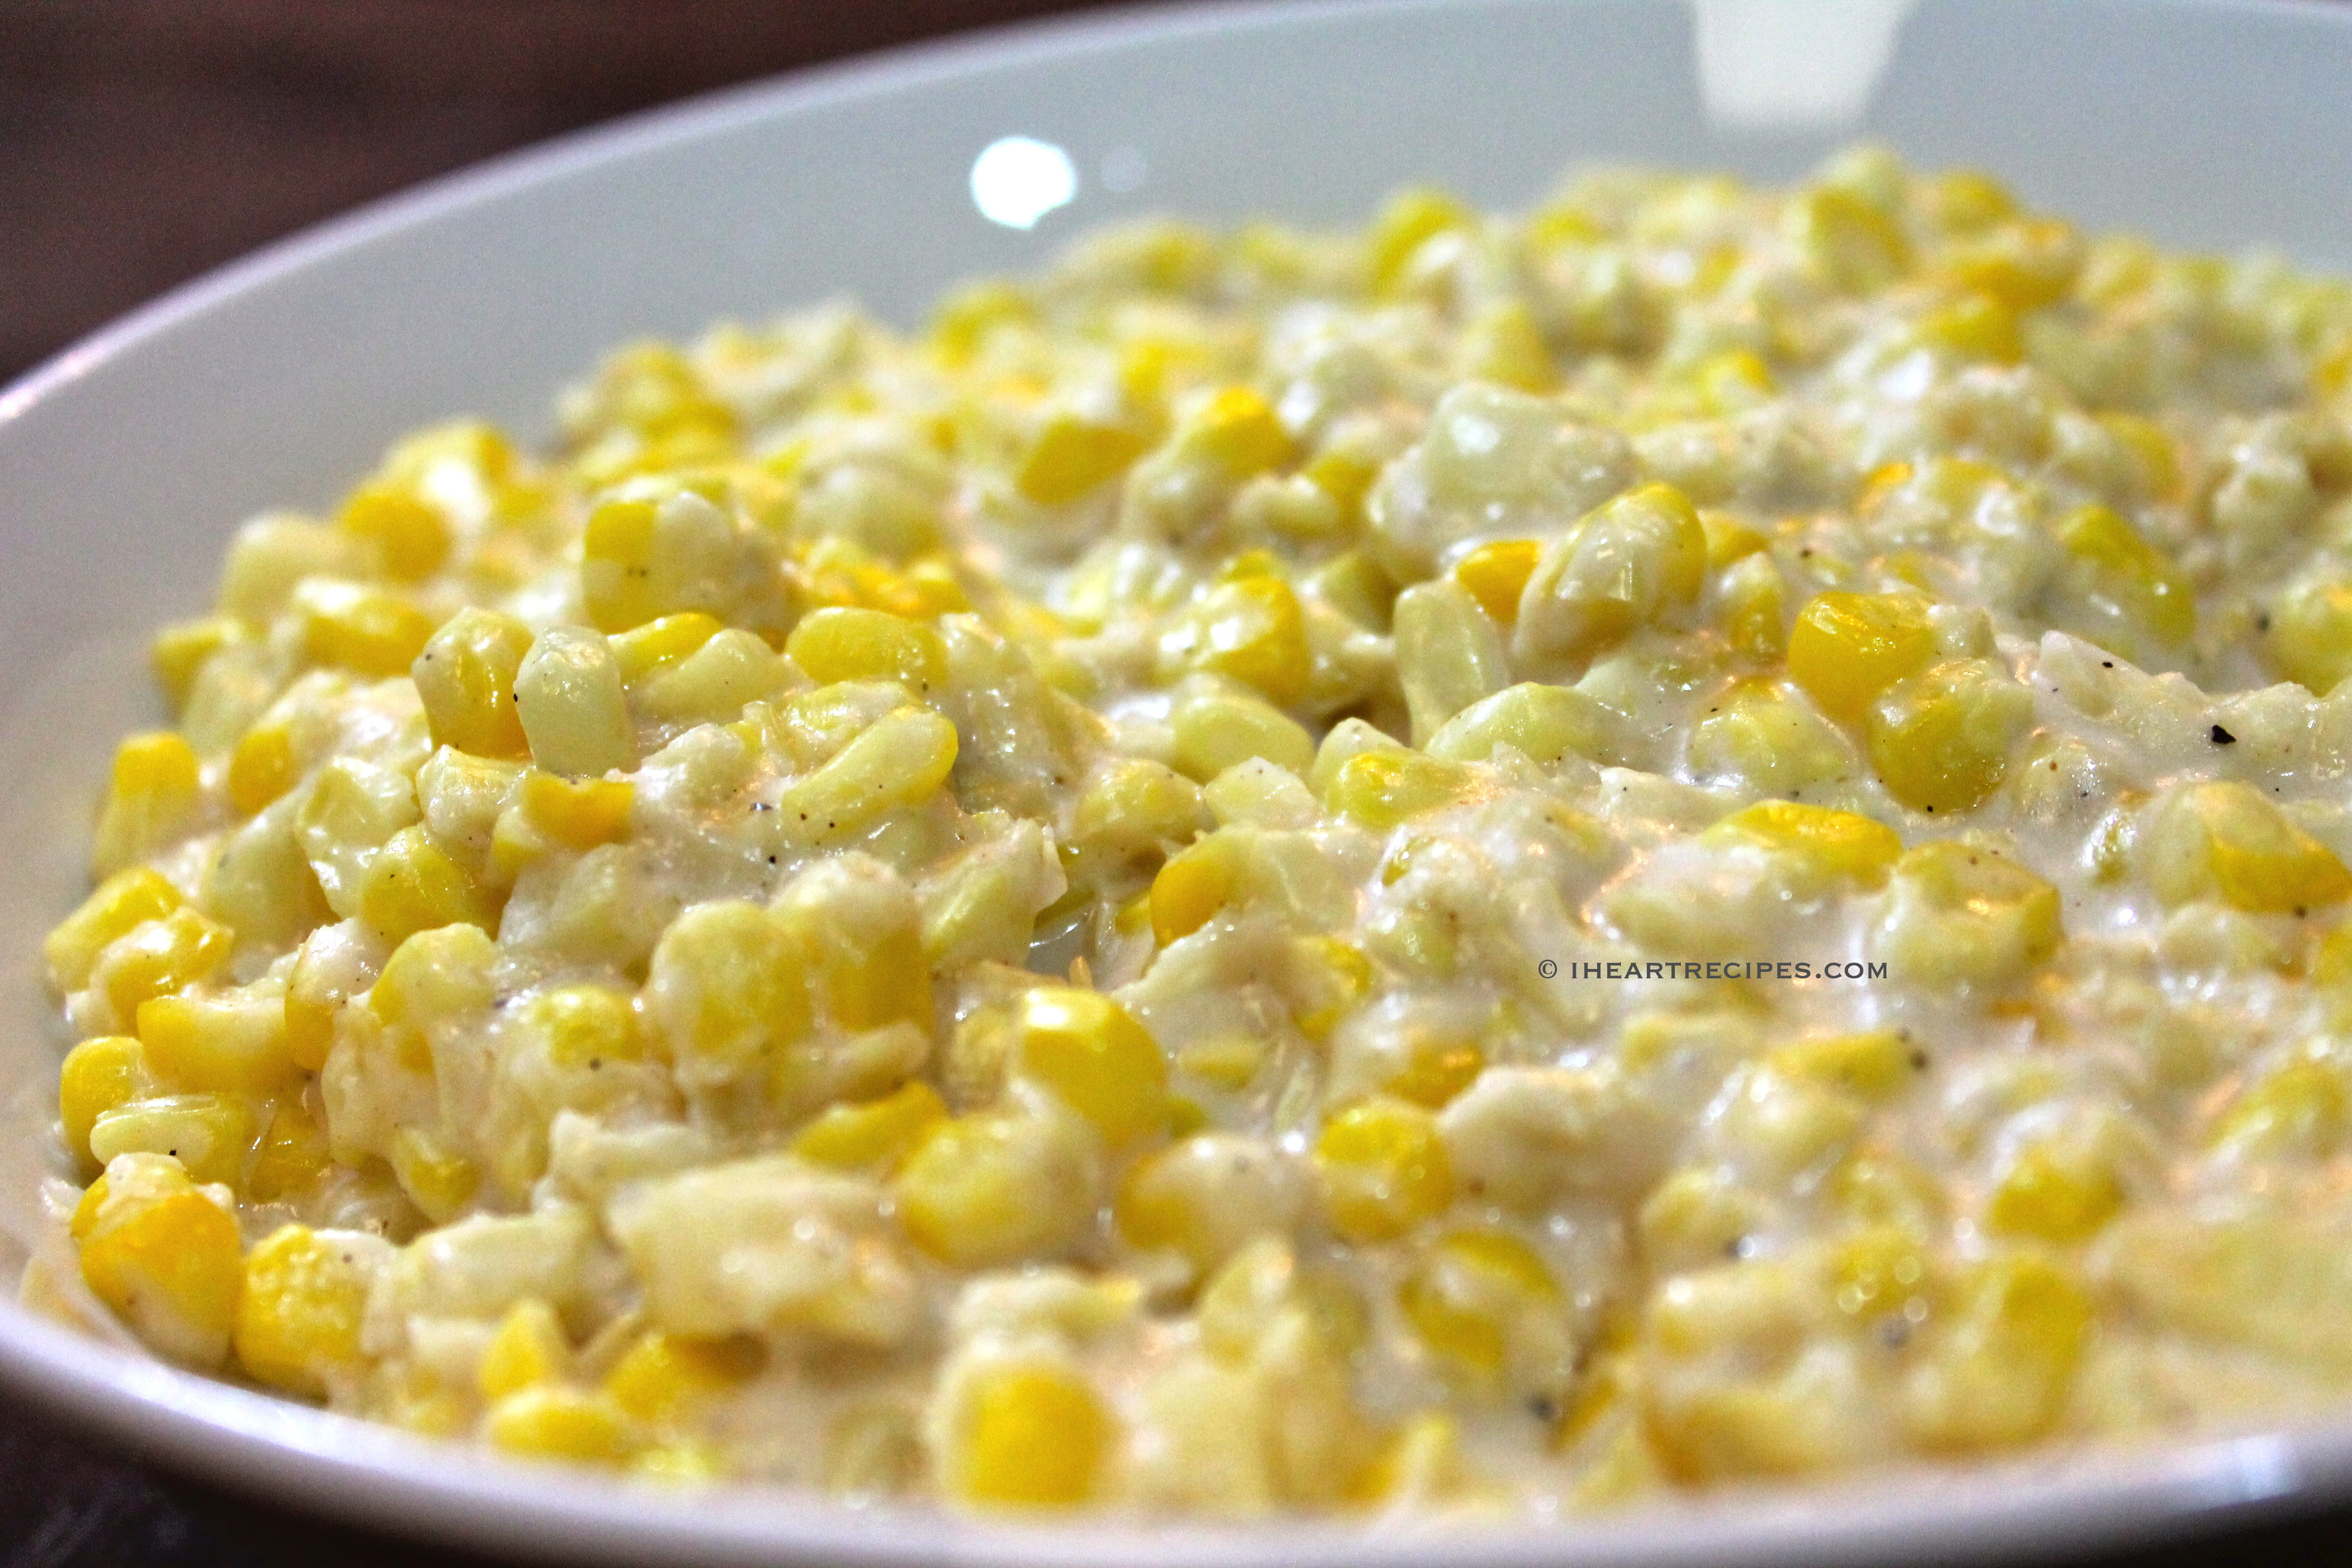 Sweet creamed corn is a classic holiday side dish